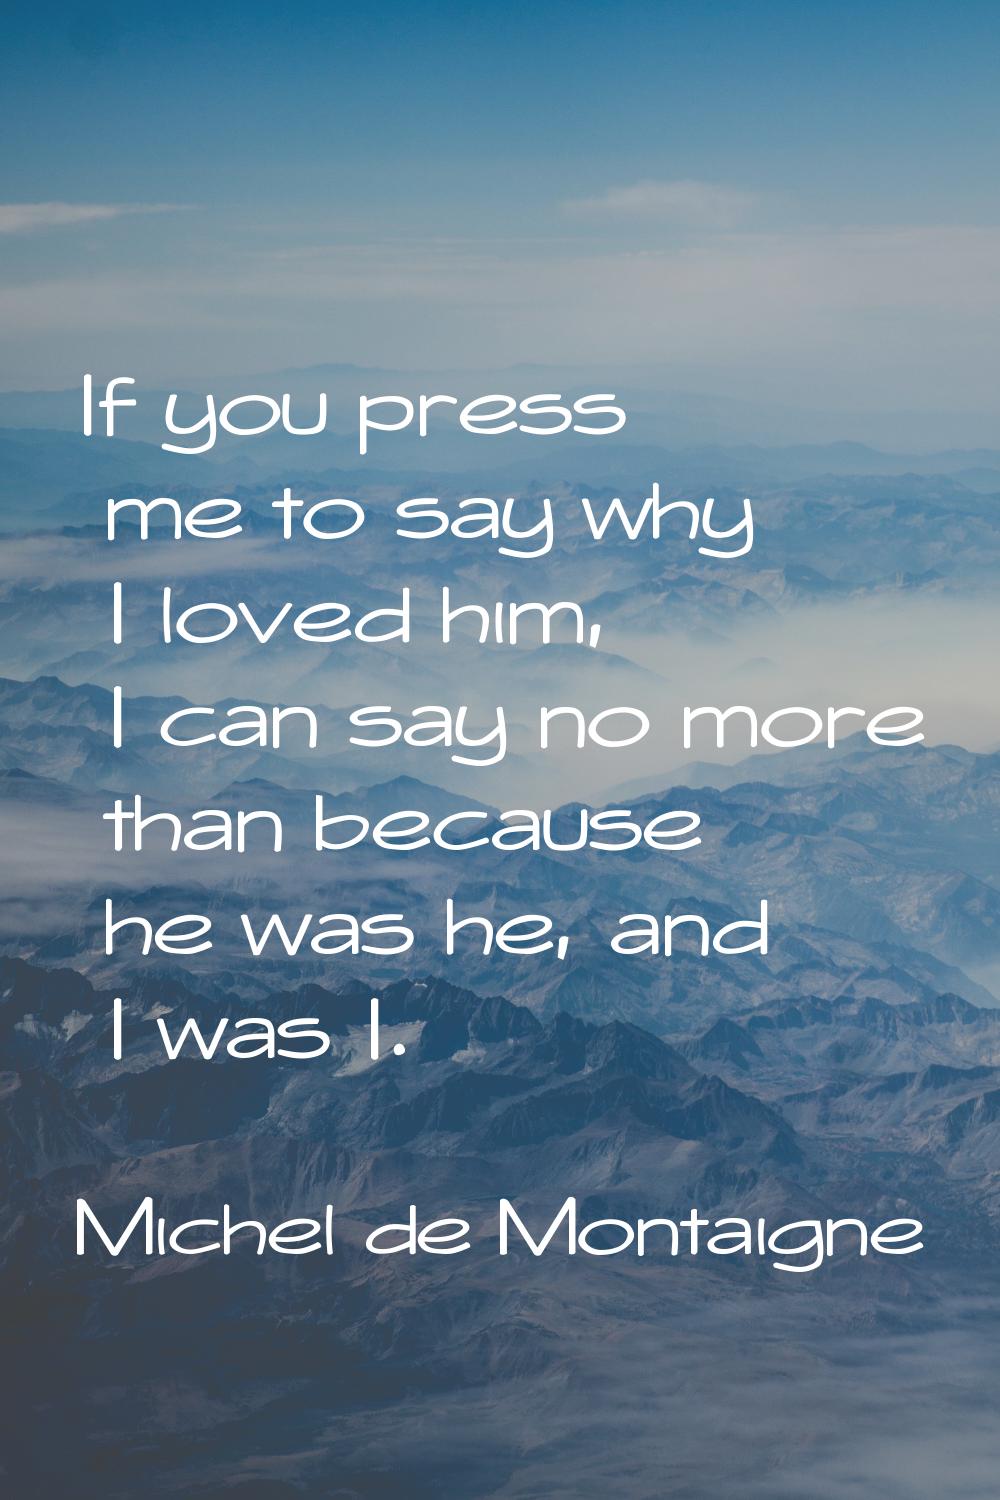 If you press me to say why I loved him, I can say no more than because he was he, and I was I.